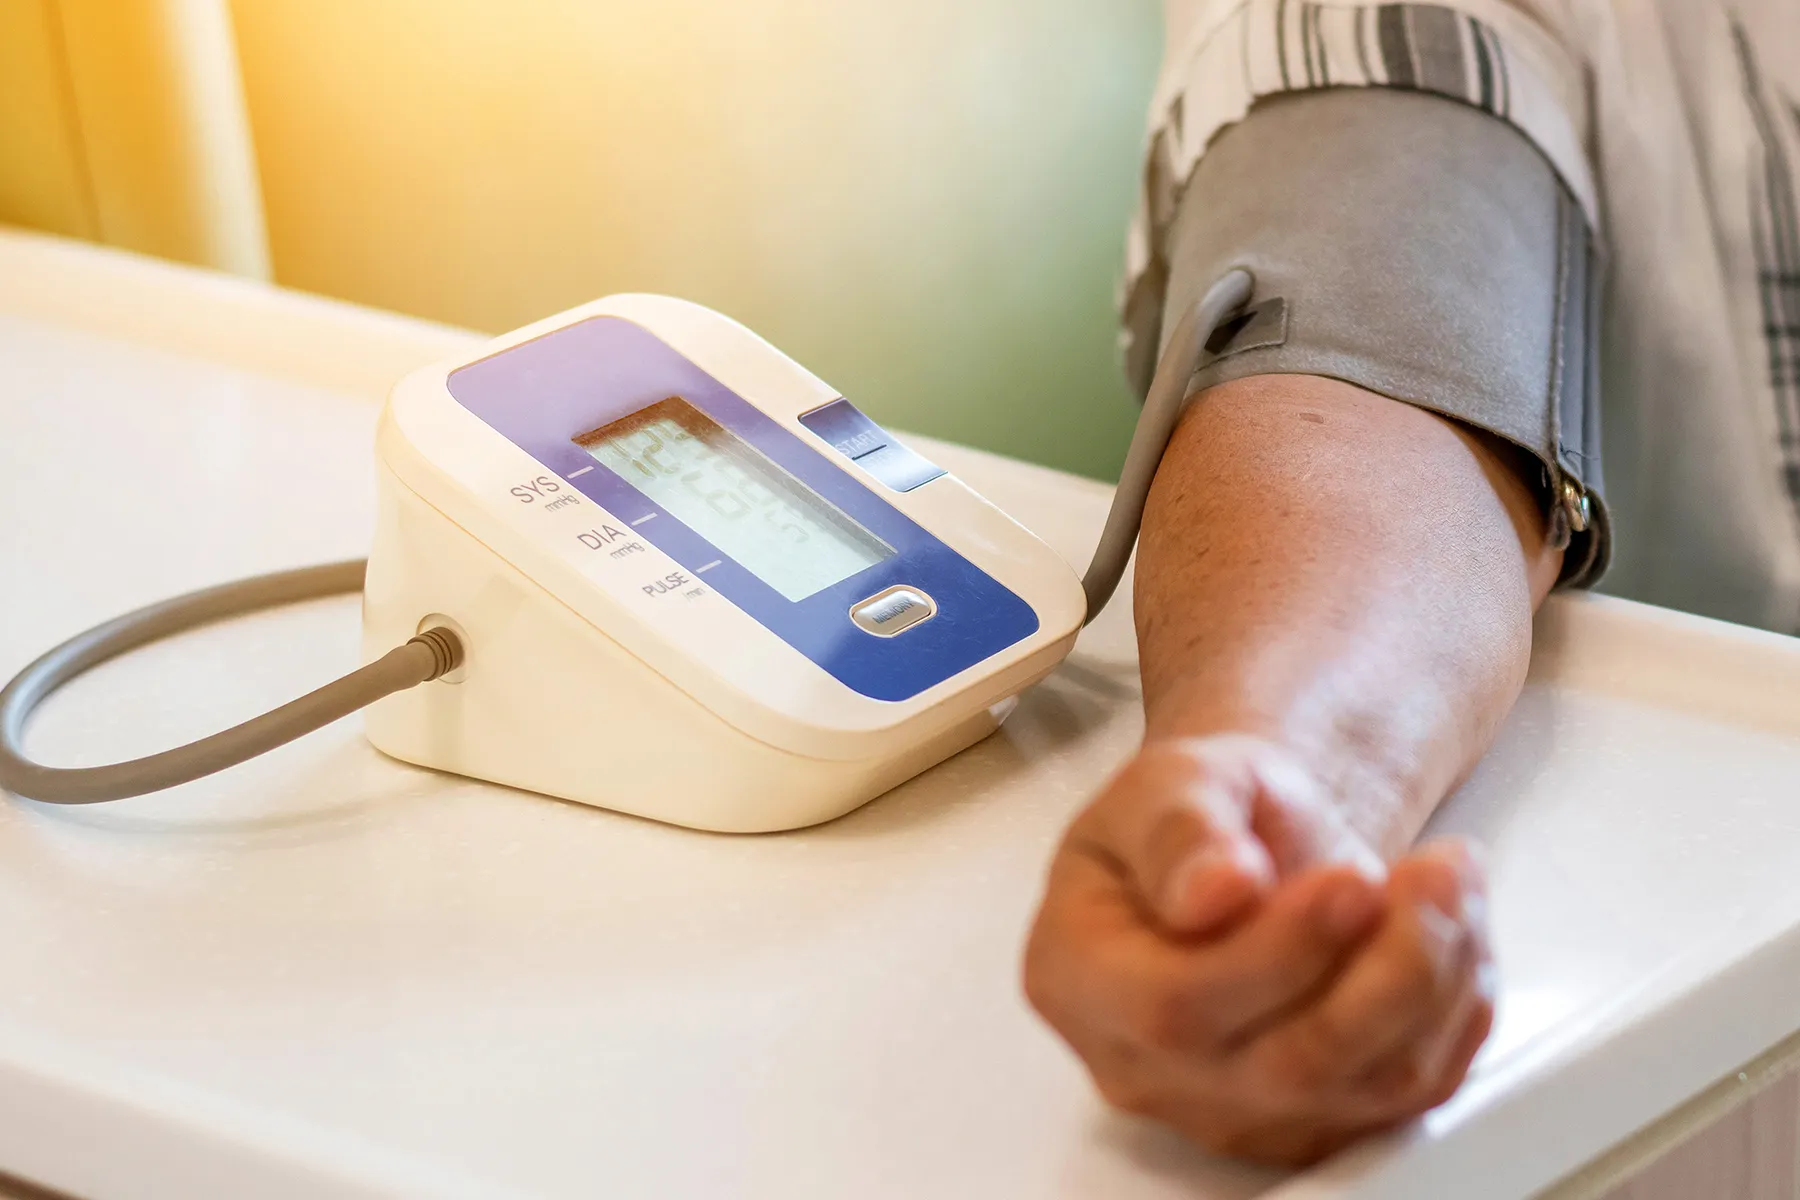 Home Blood Pressure Testing Better Than at Clinics: Study